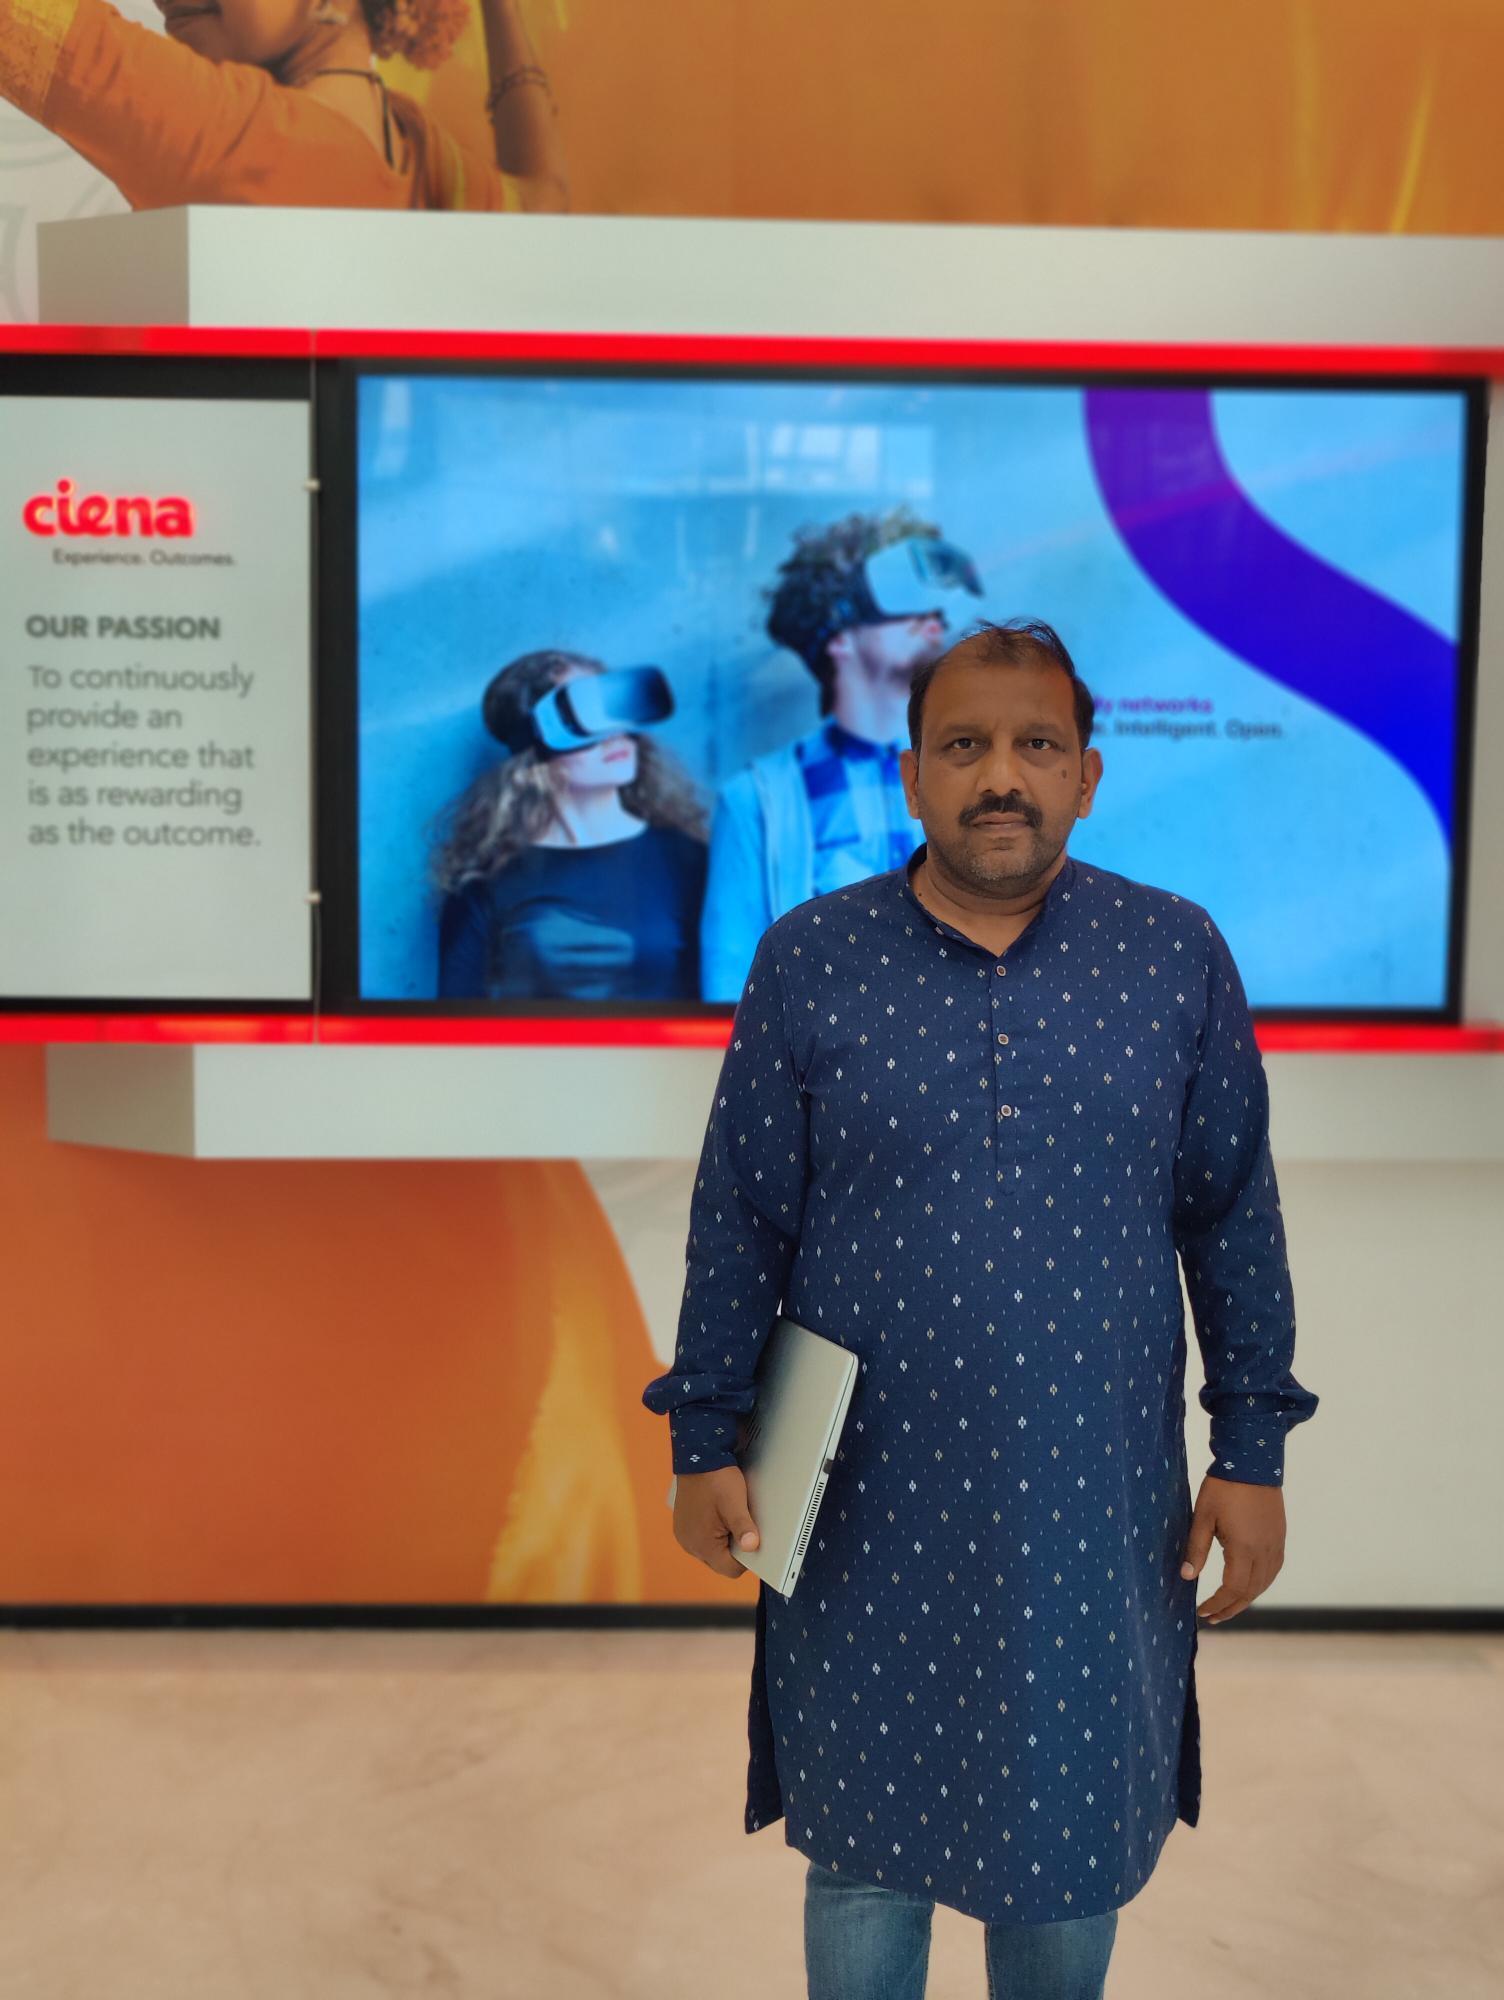 Man standing in front of a Ciena sign 